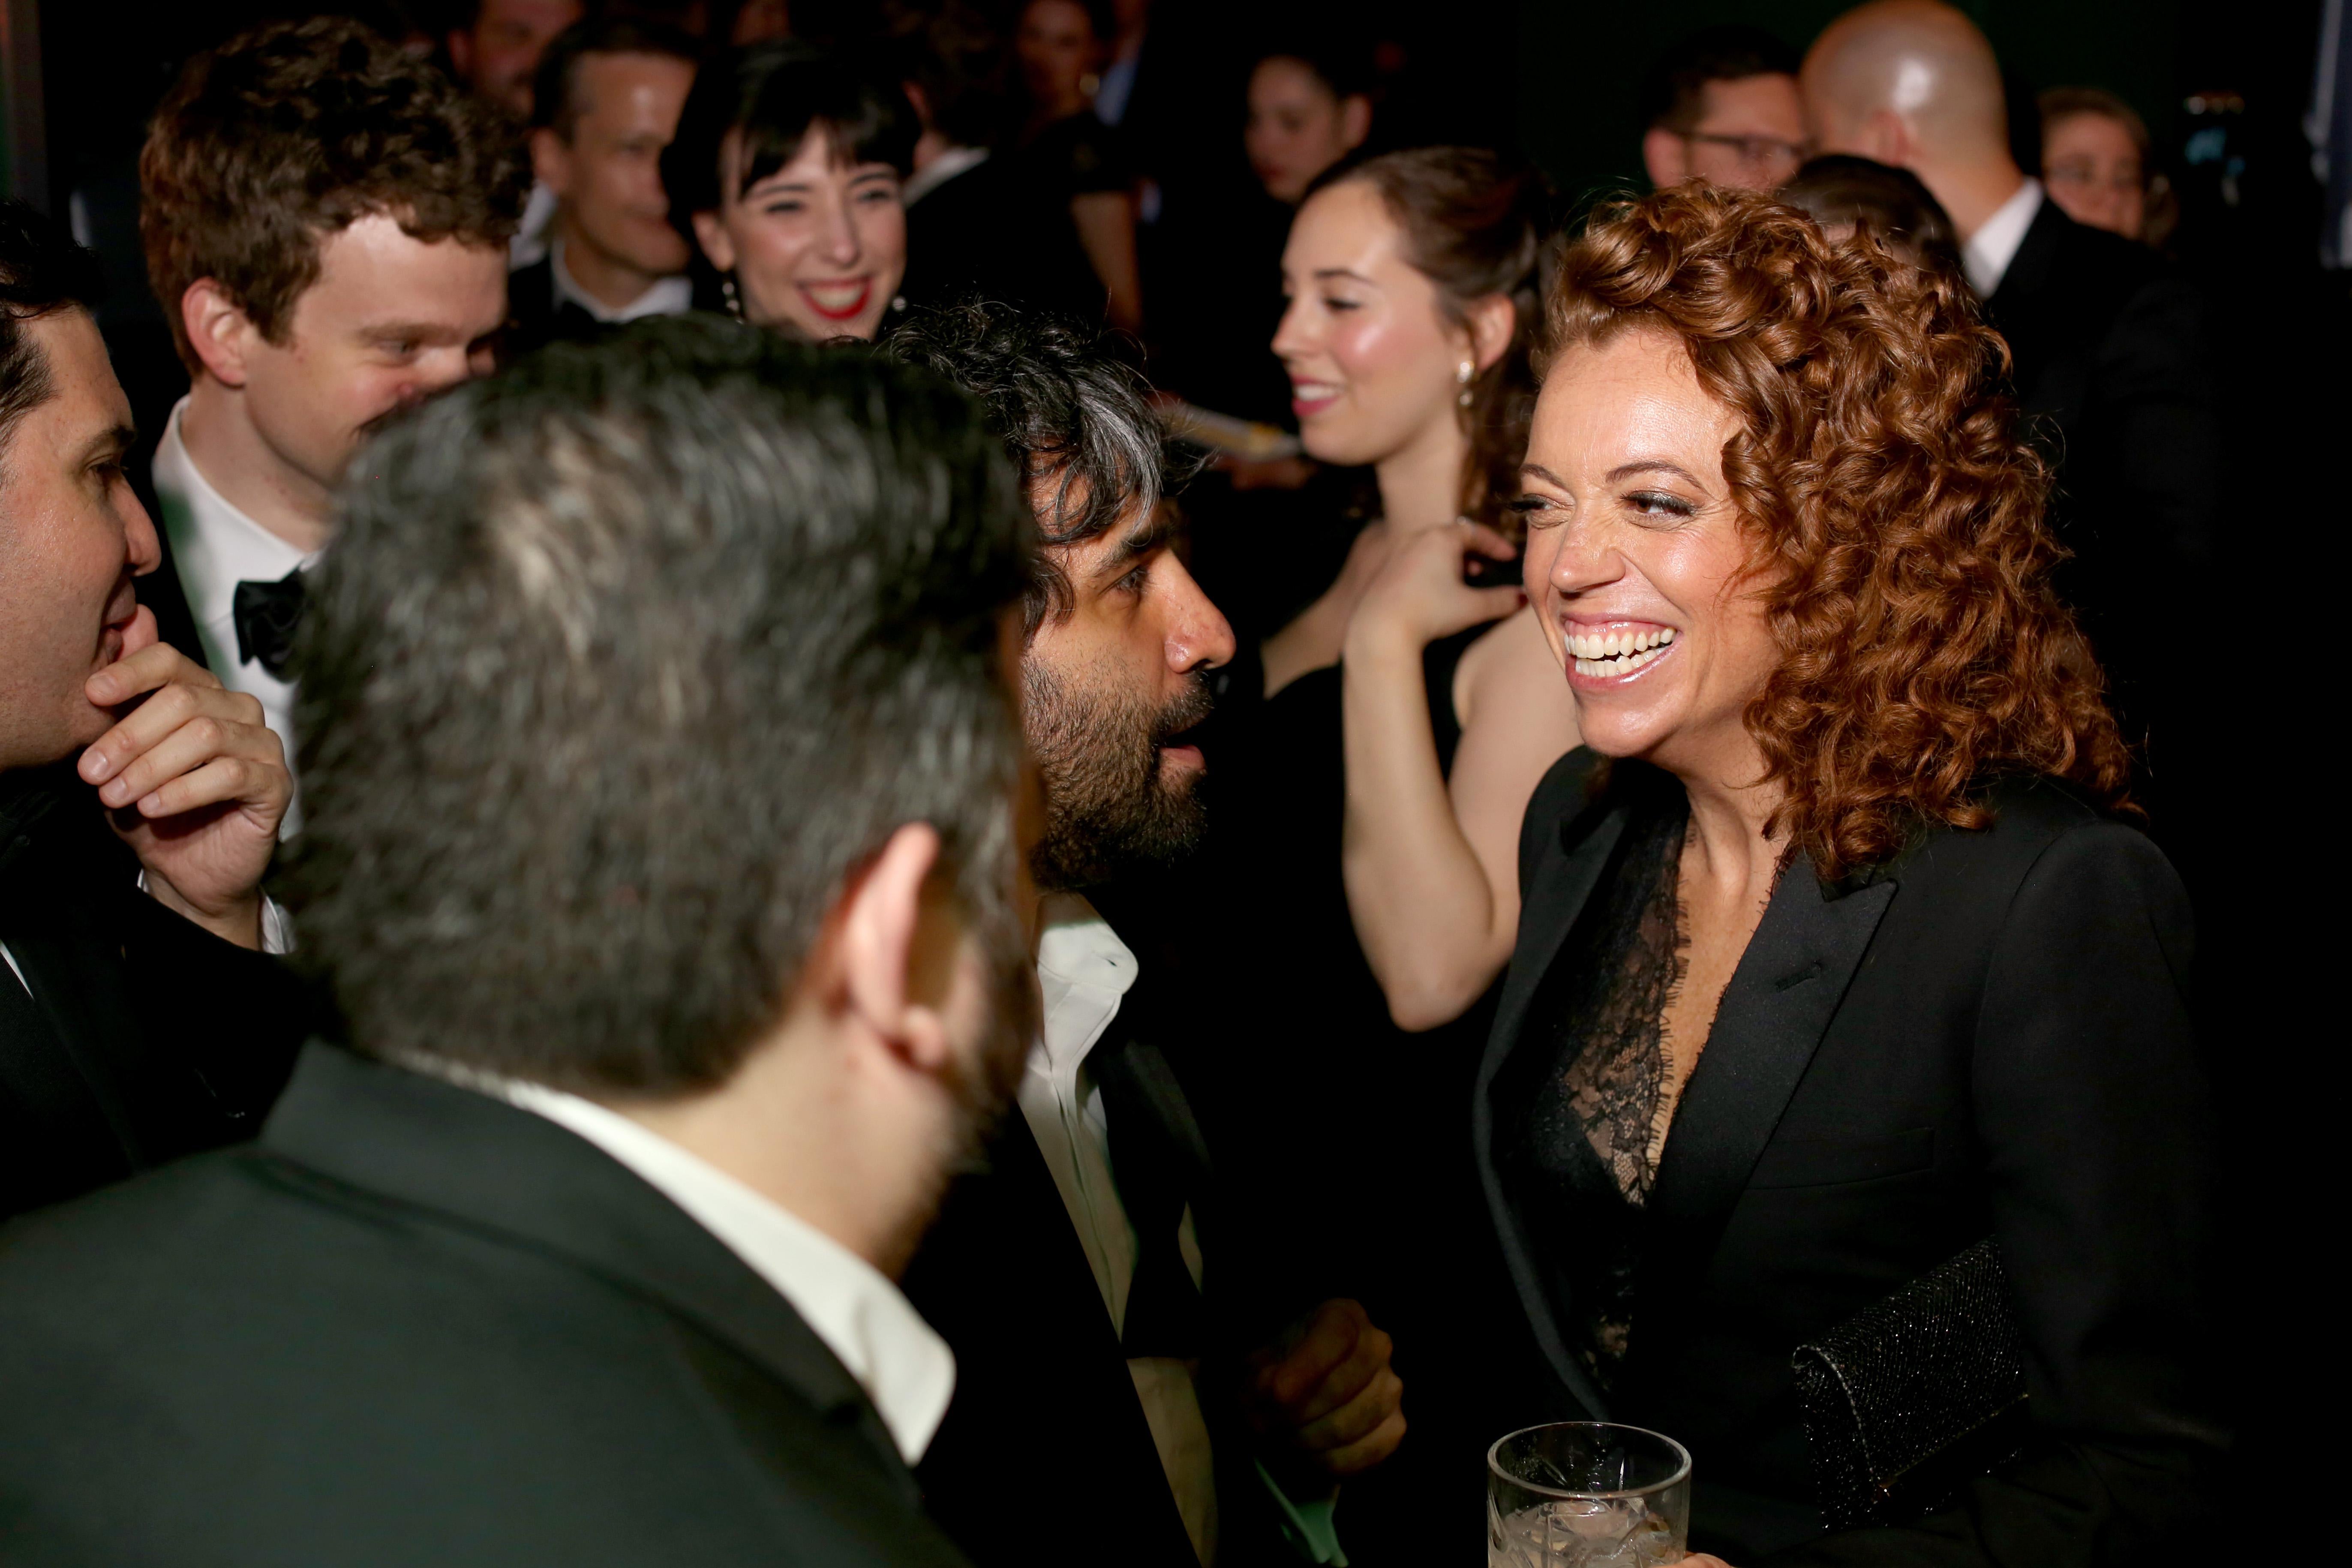 Michelle Wolf attends the Celebration After the White House Correspondents' Dinner hosted by Netflix's The Break with Michelle Wolf on April 28, 2018 in Washington, D.C.